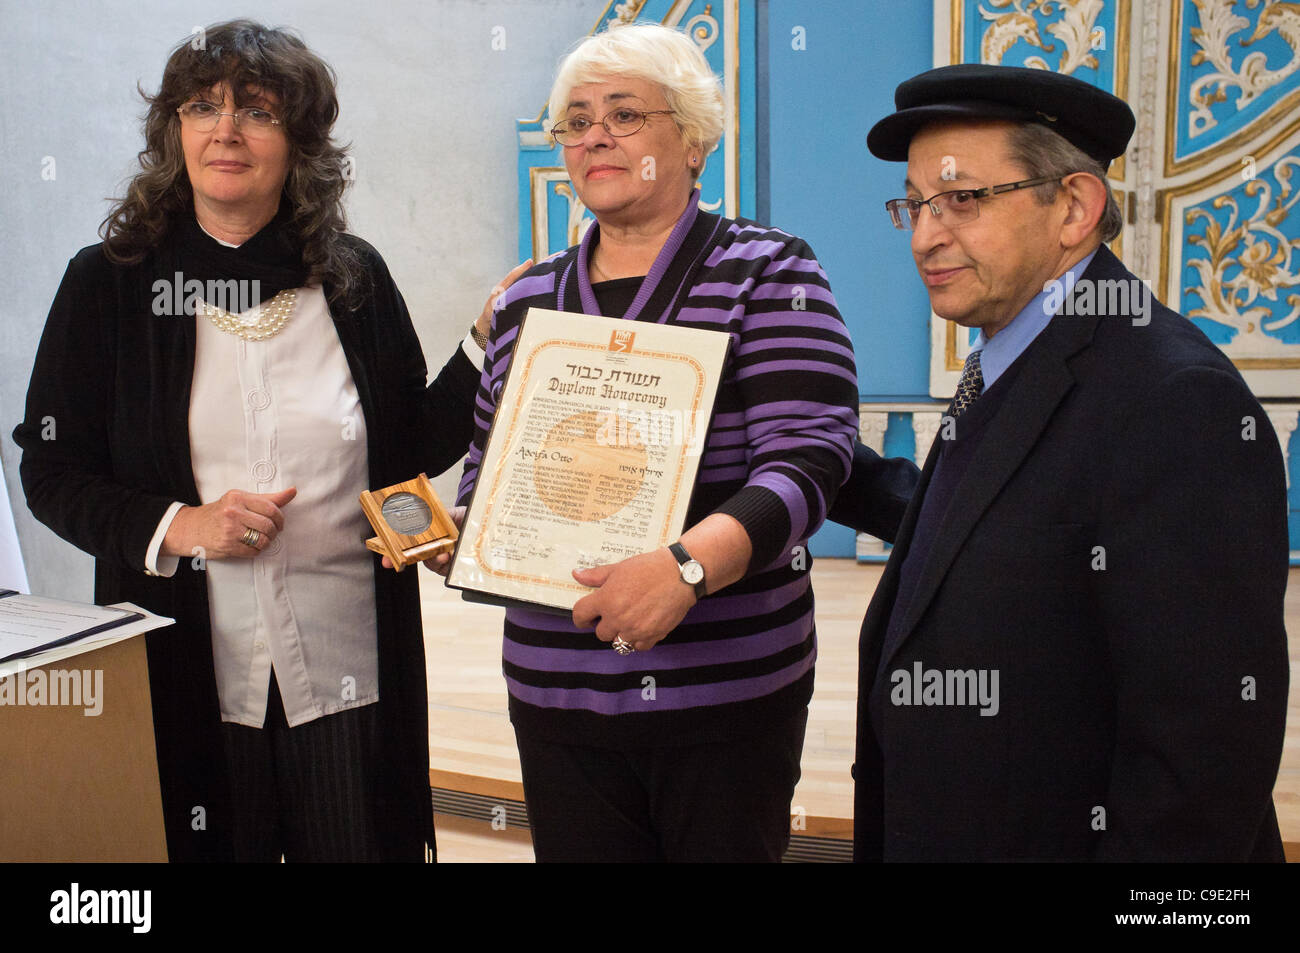 Anna Suchecka honored at Yad Vashem with medal and certificate of honor on behalf of father, Adolf Otto, as Righteous Among the Nations in the presence of the Hedva Gil, who’s life was saved in World War II. Jerusalem, Israel. 28th November 2011. Stock Photo